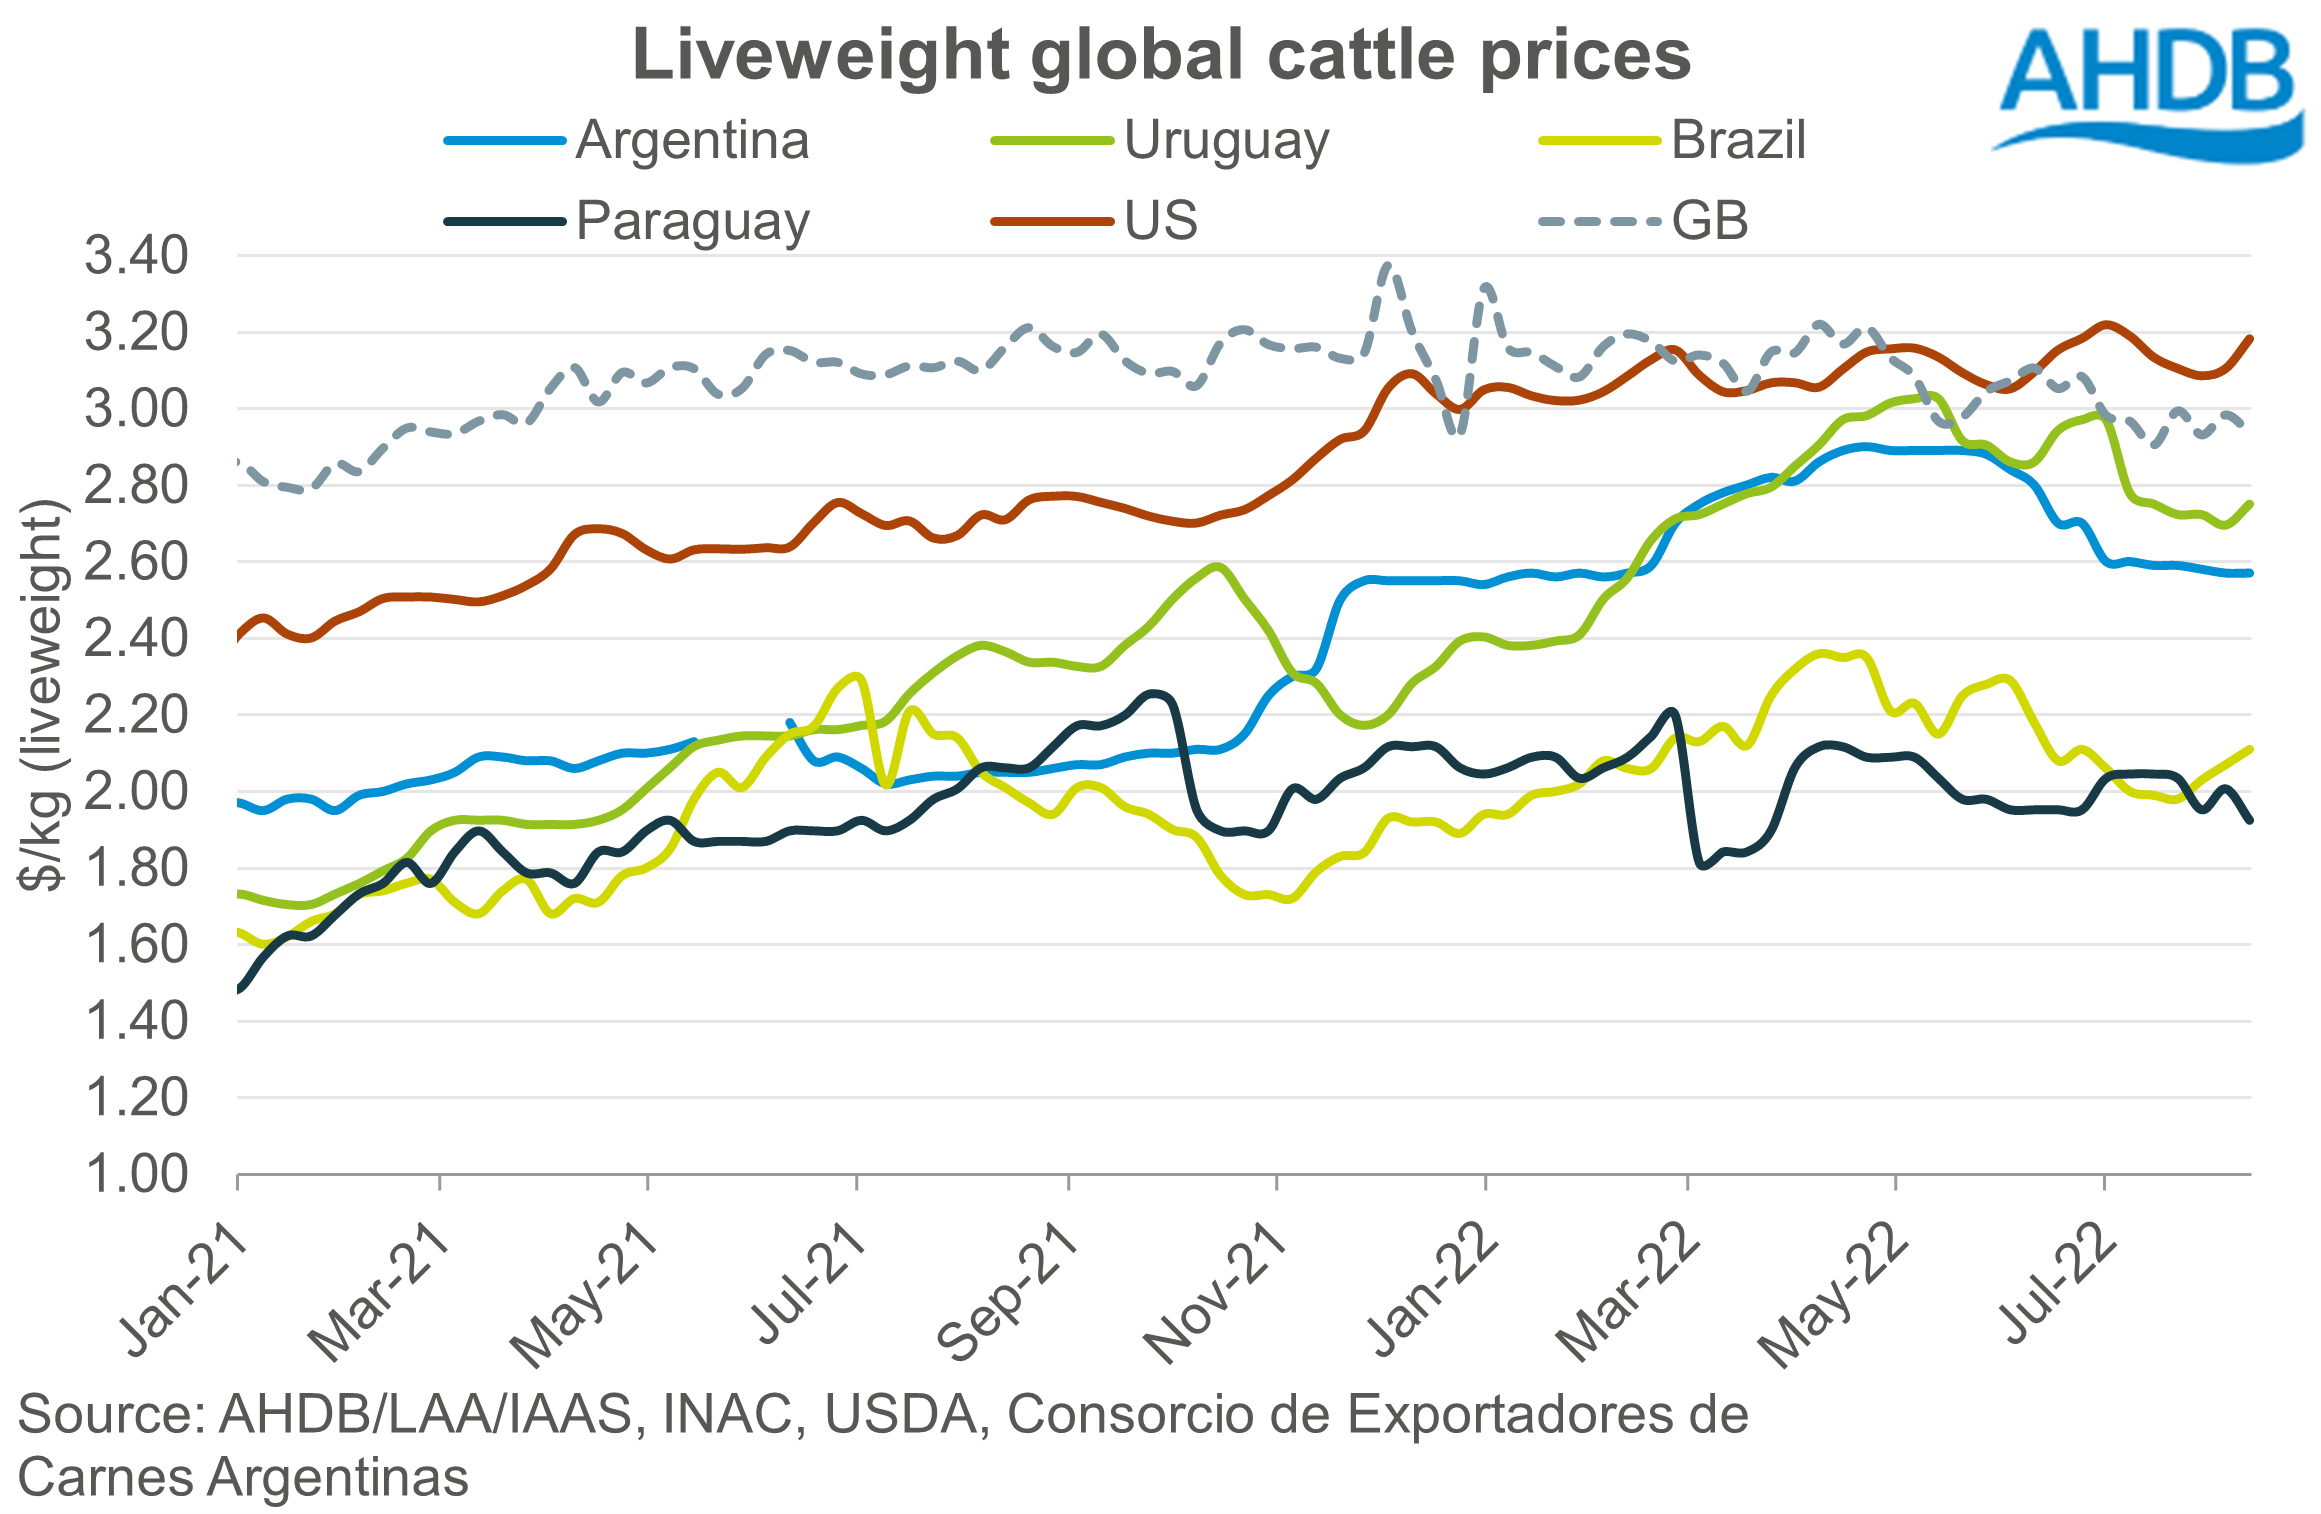 Graph showing weekly liveweight global cattle prices in USD